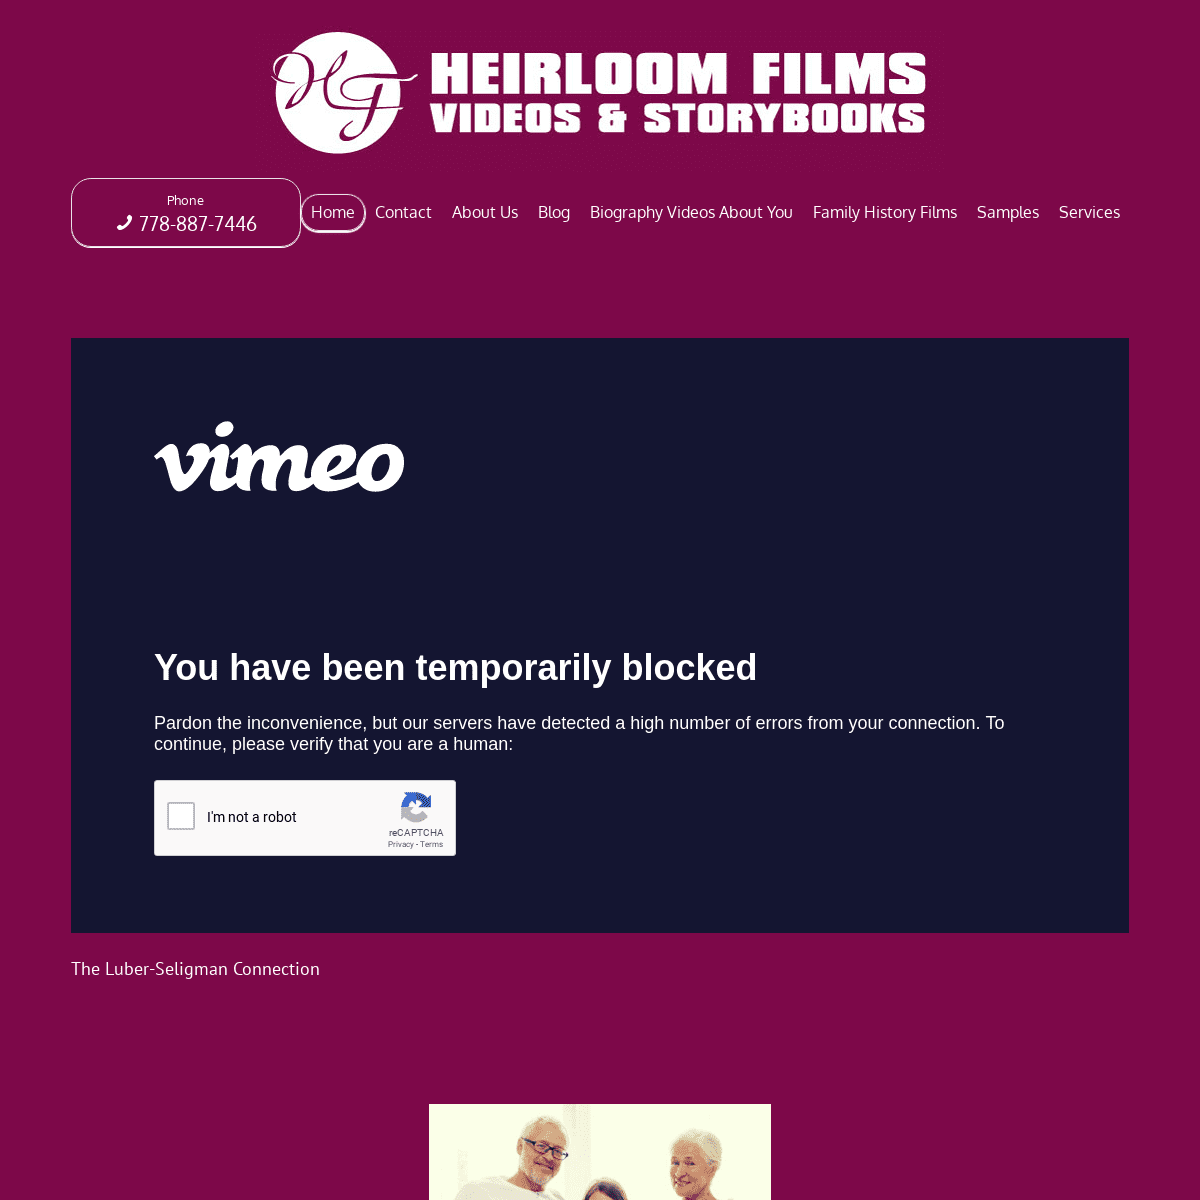 A complete backup of heirloomfilms.ca